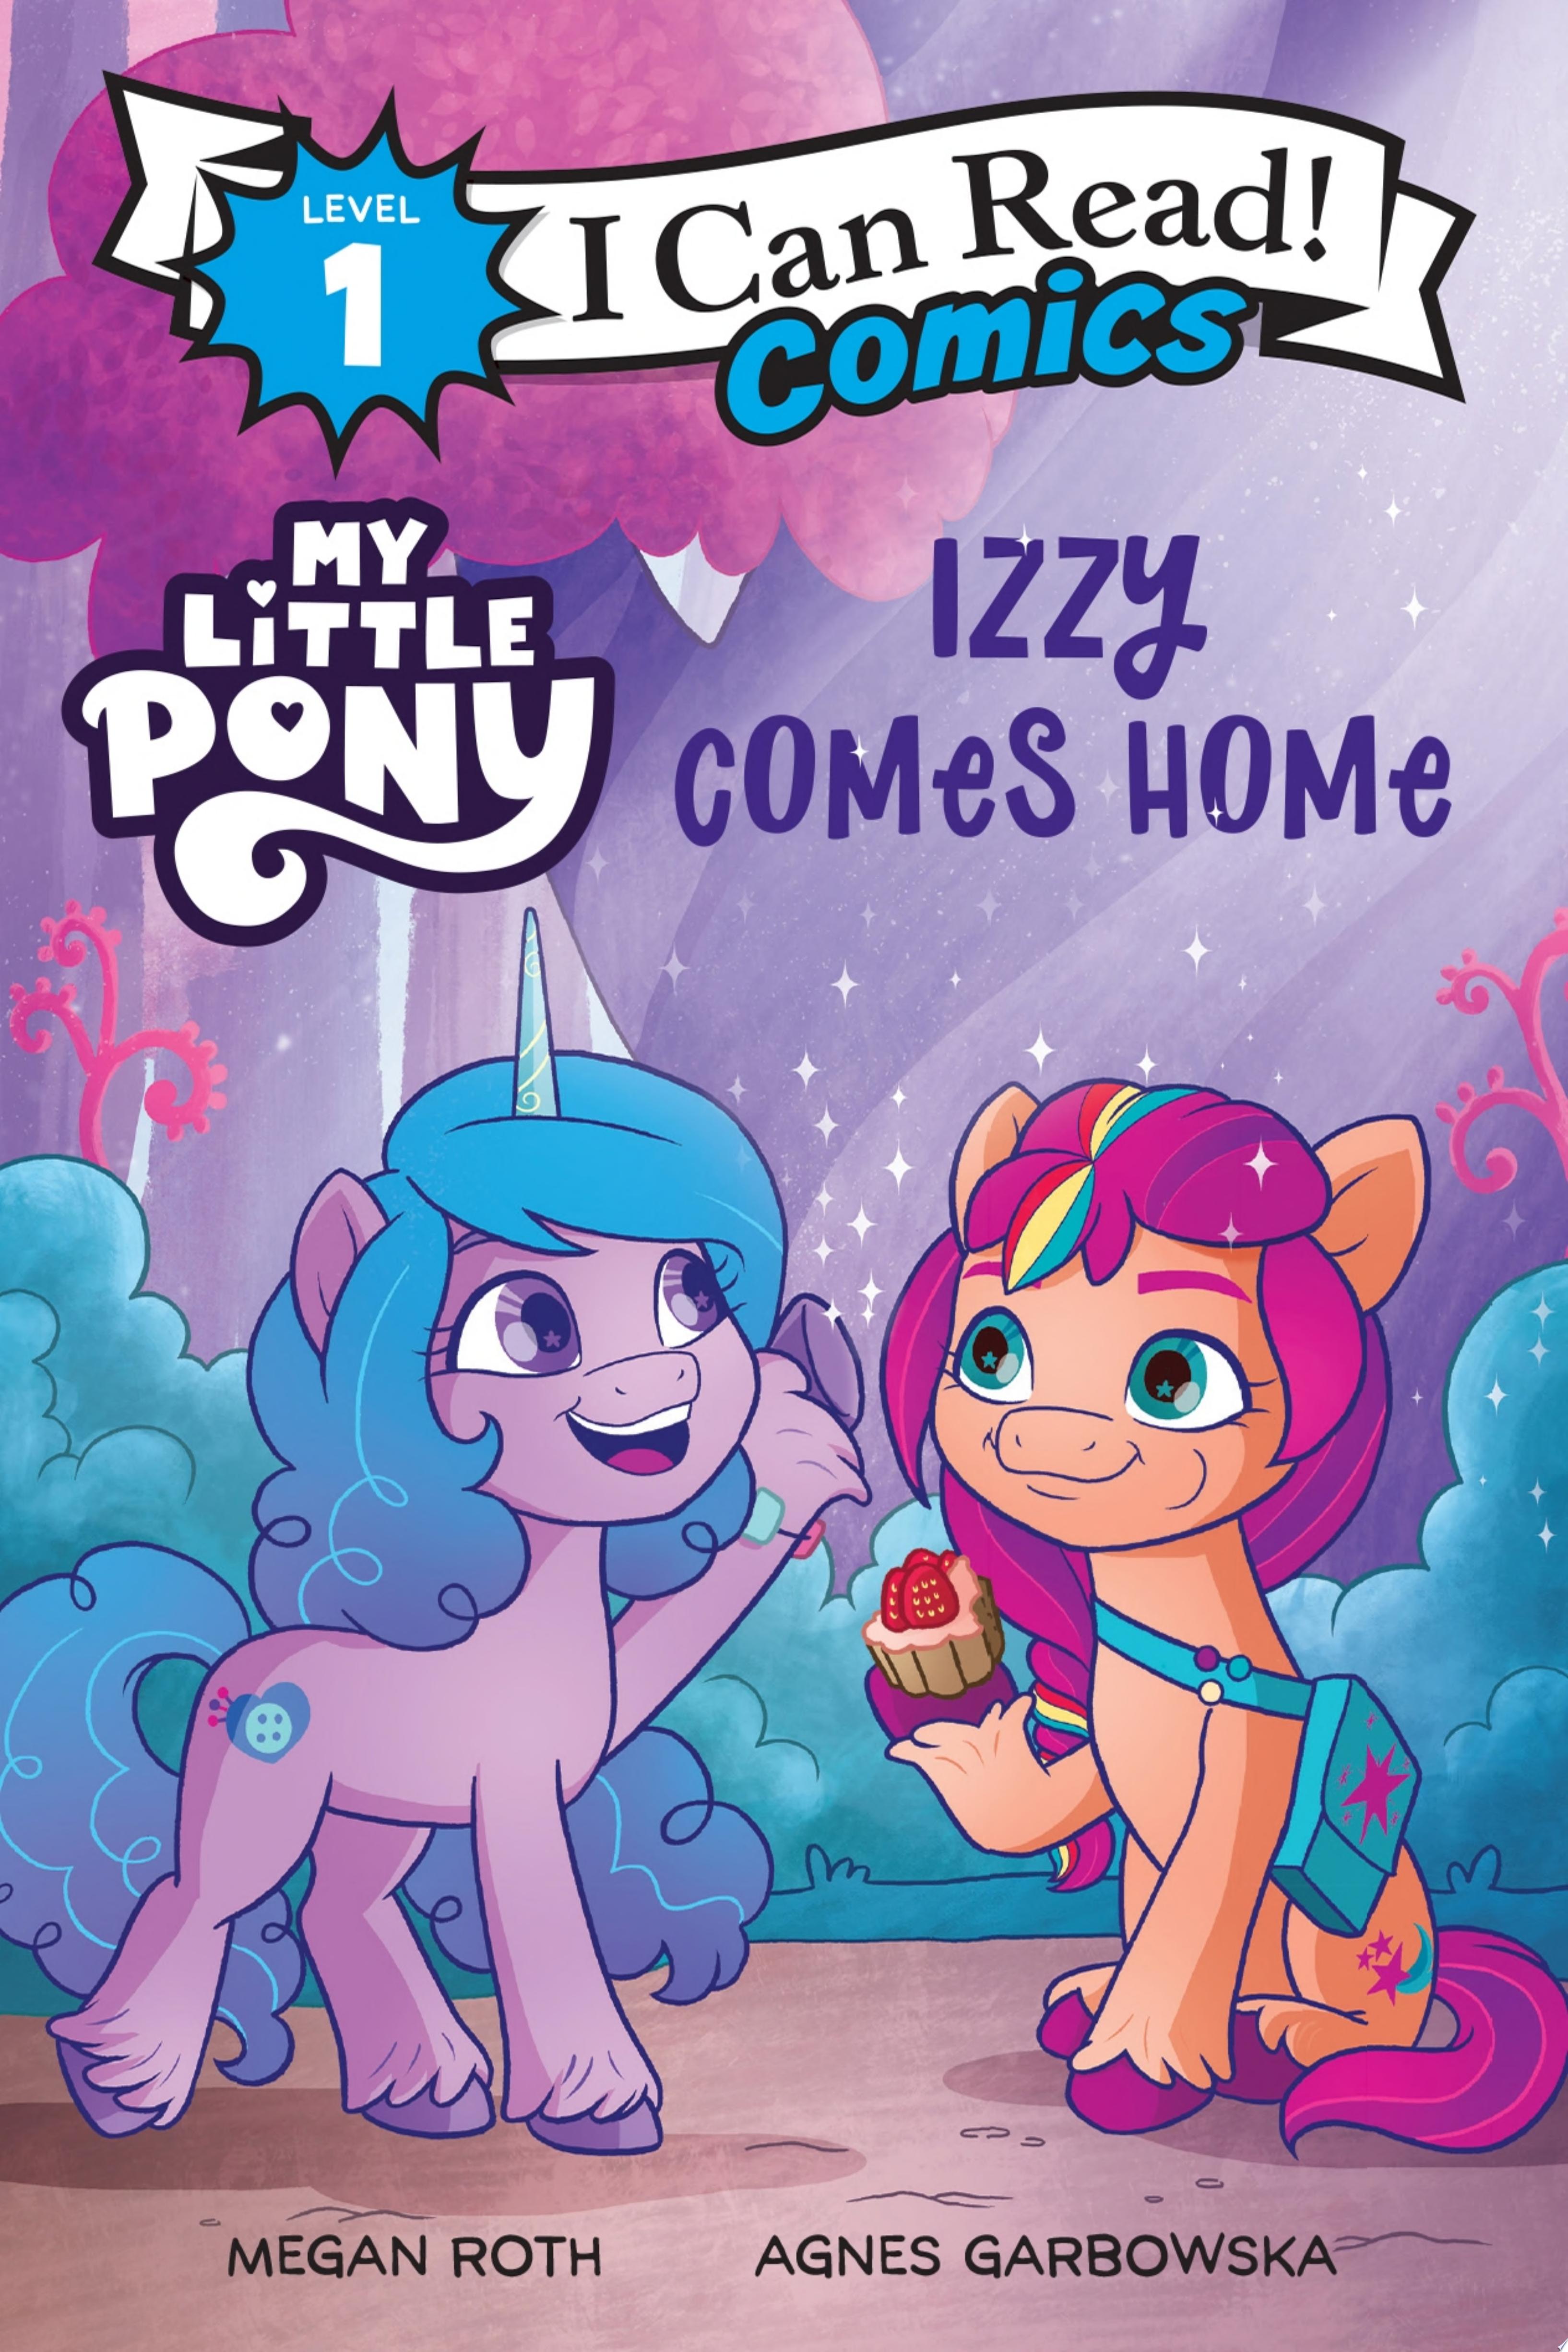 Image for "My Little Pony: Izzy Comes Home"